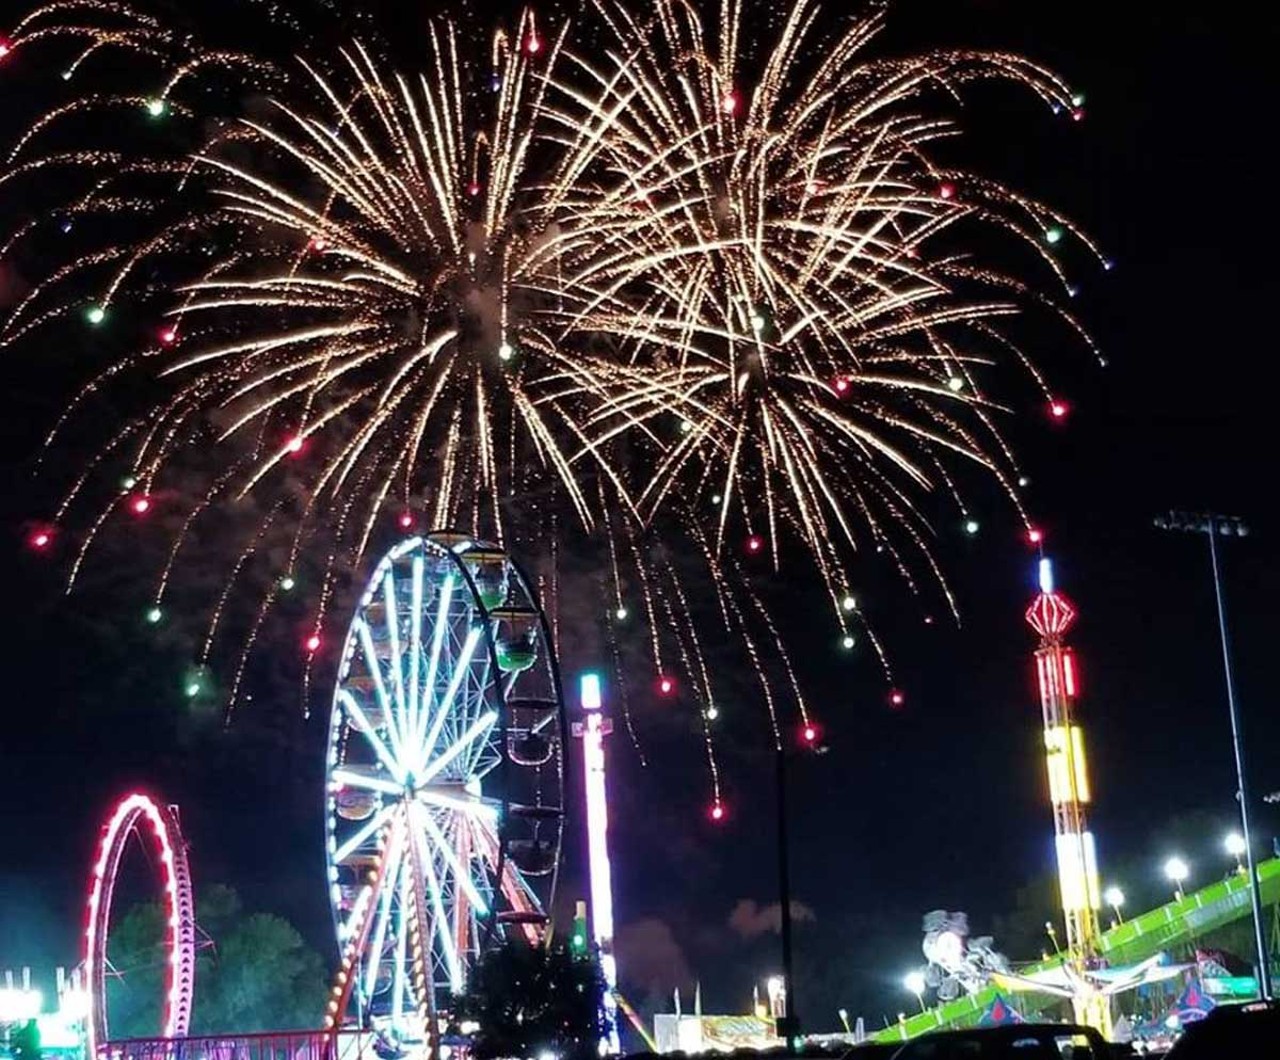 Livonia: Livonia Spree
Fireworks start at 10:15 p.m., Sunday, June 30; 33841 Lyndon St., Livonia; livoniaspree.com
Livonia’s long-running summer festival is set for June 25-30, ending with a bang thanks to Sunday’s fireworks show. Wristbands are available to purchase through June 24 for $25 and grant unlimited carnival rides per day.